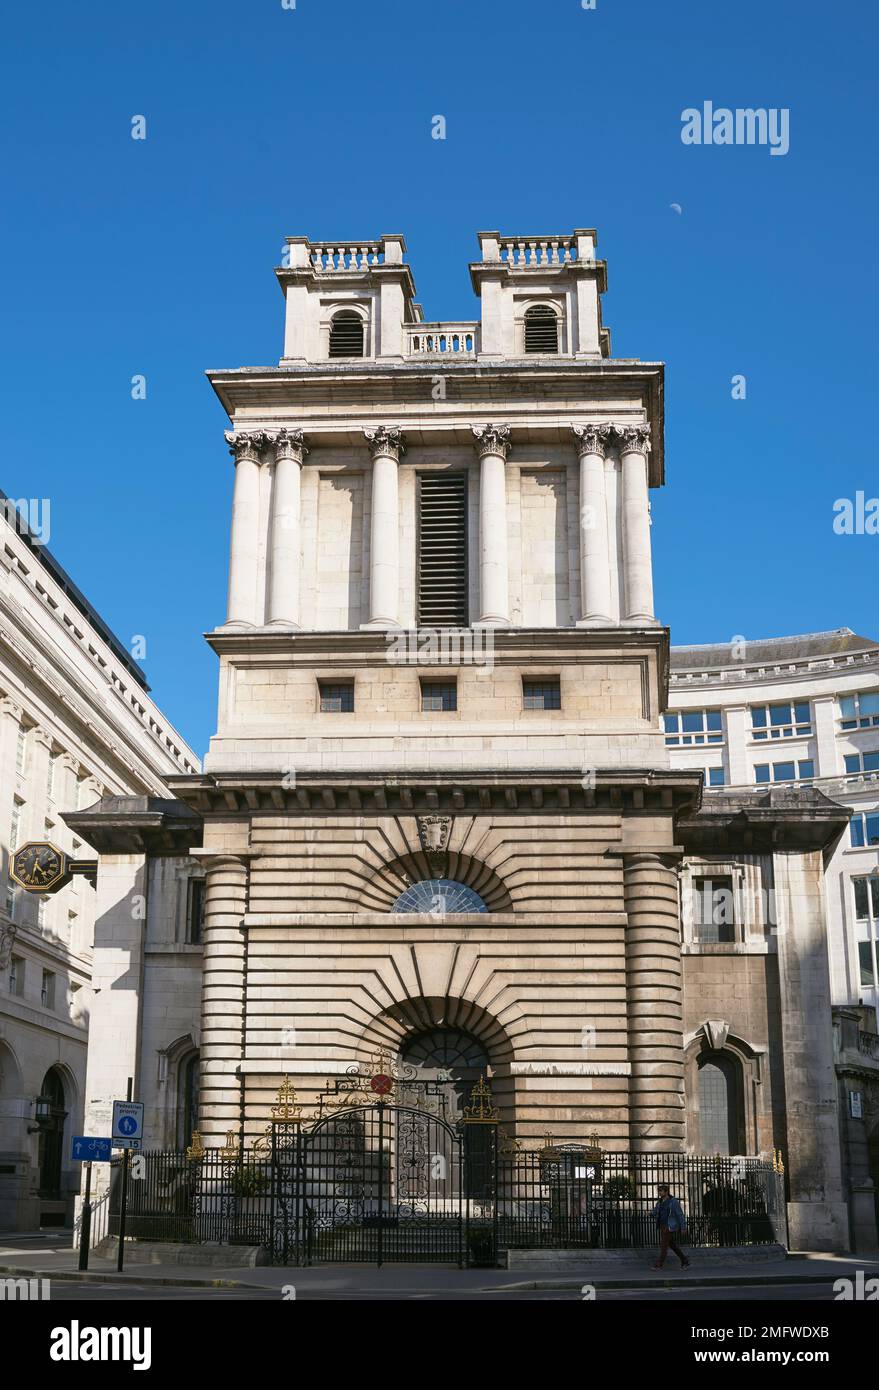 The Baroque facade of the 18th century St Mary Woolnoth church, at the junction of King William Street and Lombard Street, in the City of London, UK Stock Photo